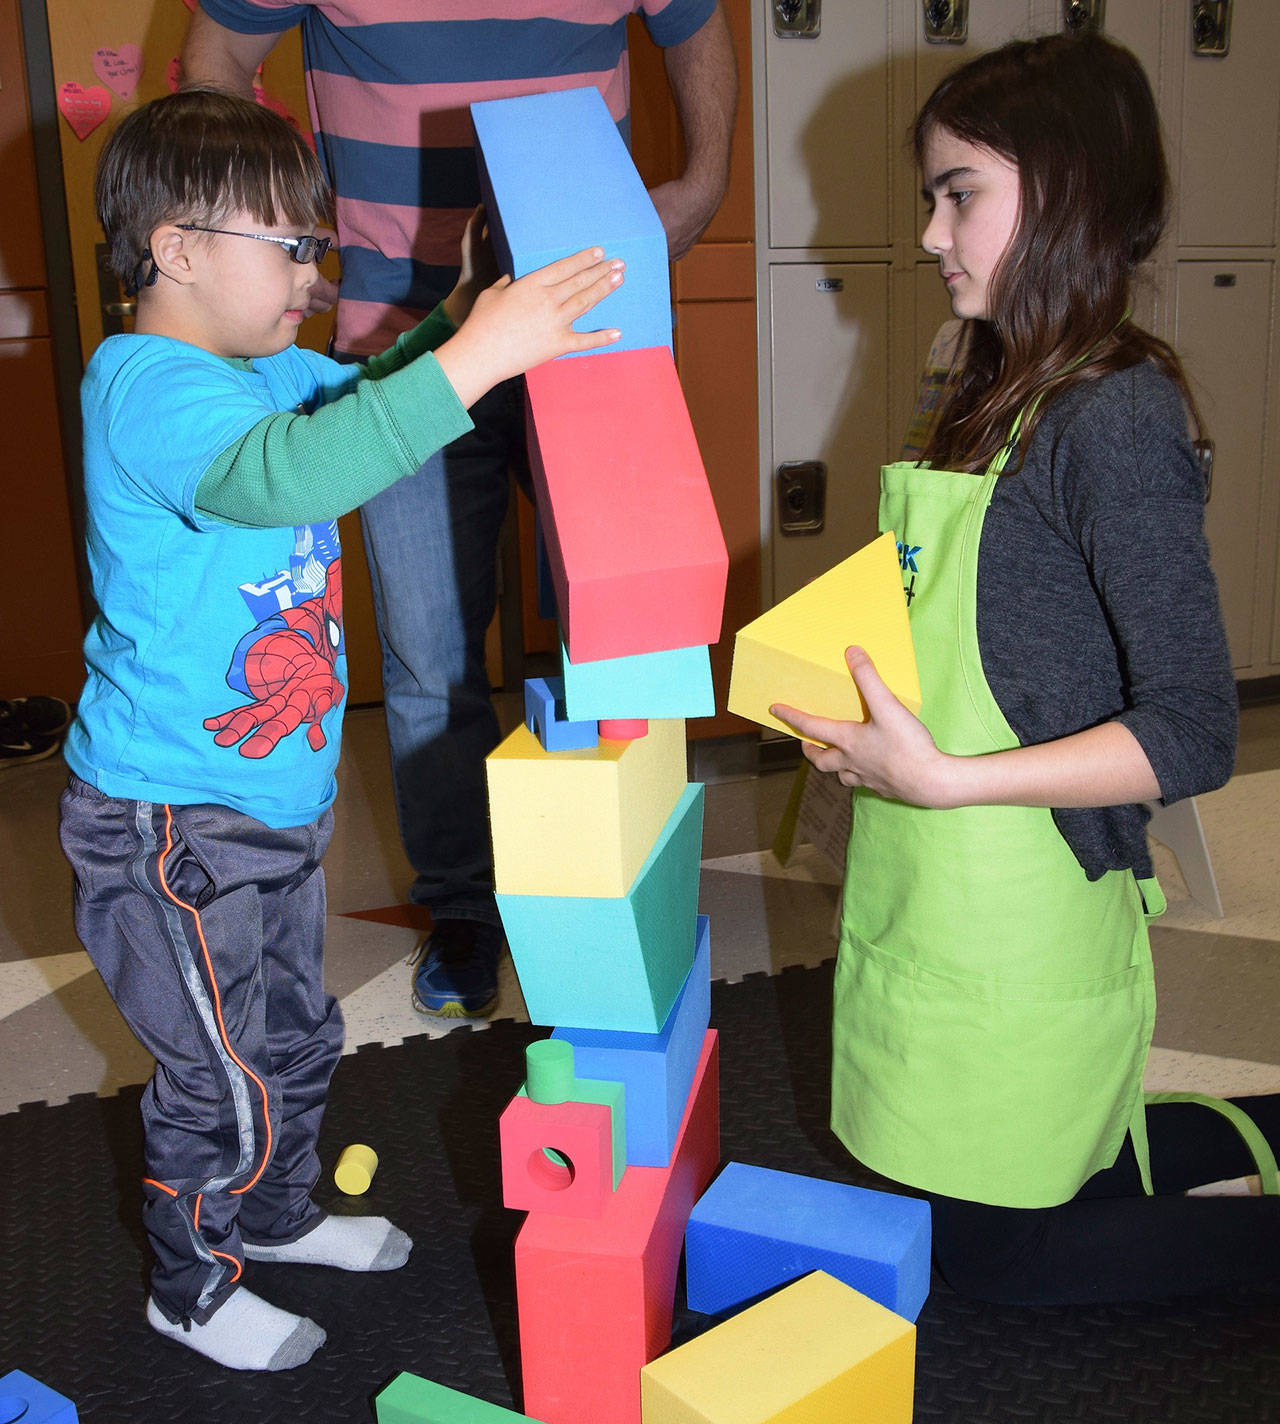 Kenna Marshall, of Block Fest, has Max Froman, 6, assemble a block tower during the Auburn School District’s 12th annual Early Learning Fair in the Auburn High School Commons on Monday. RACHEL CIAMPI, Auburn Reporter